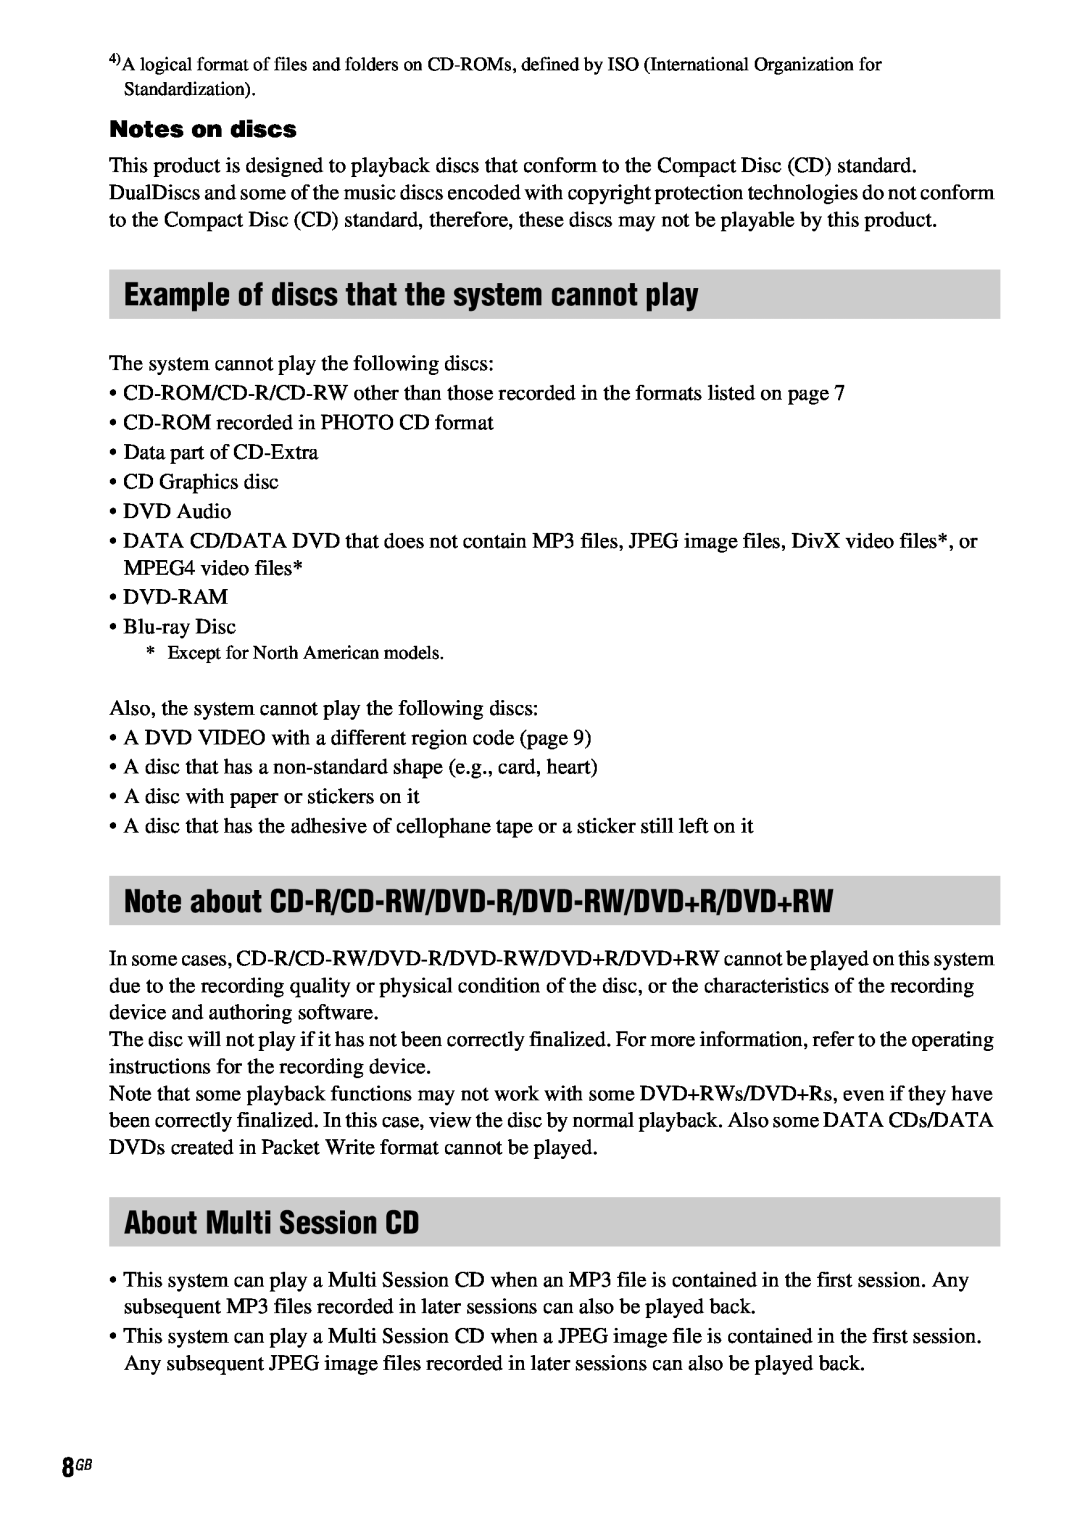 Sony DAV-HDX685 manual Example of discs that the system cannot play, Note about CD-R/CD-RW/DVD-R/DVD-RW/DVD+R/DVD+RW 